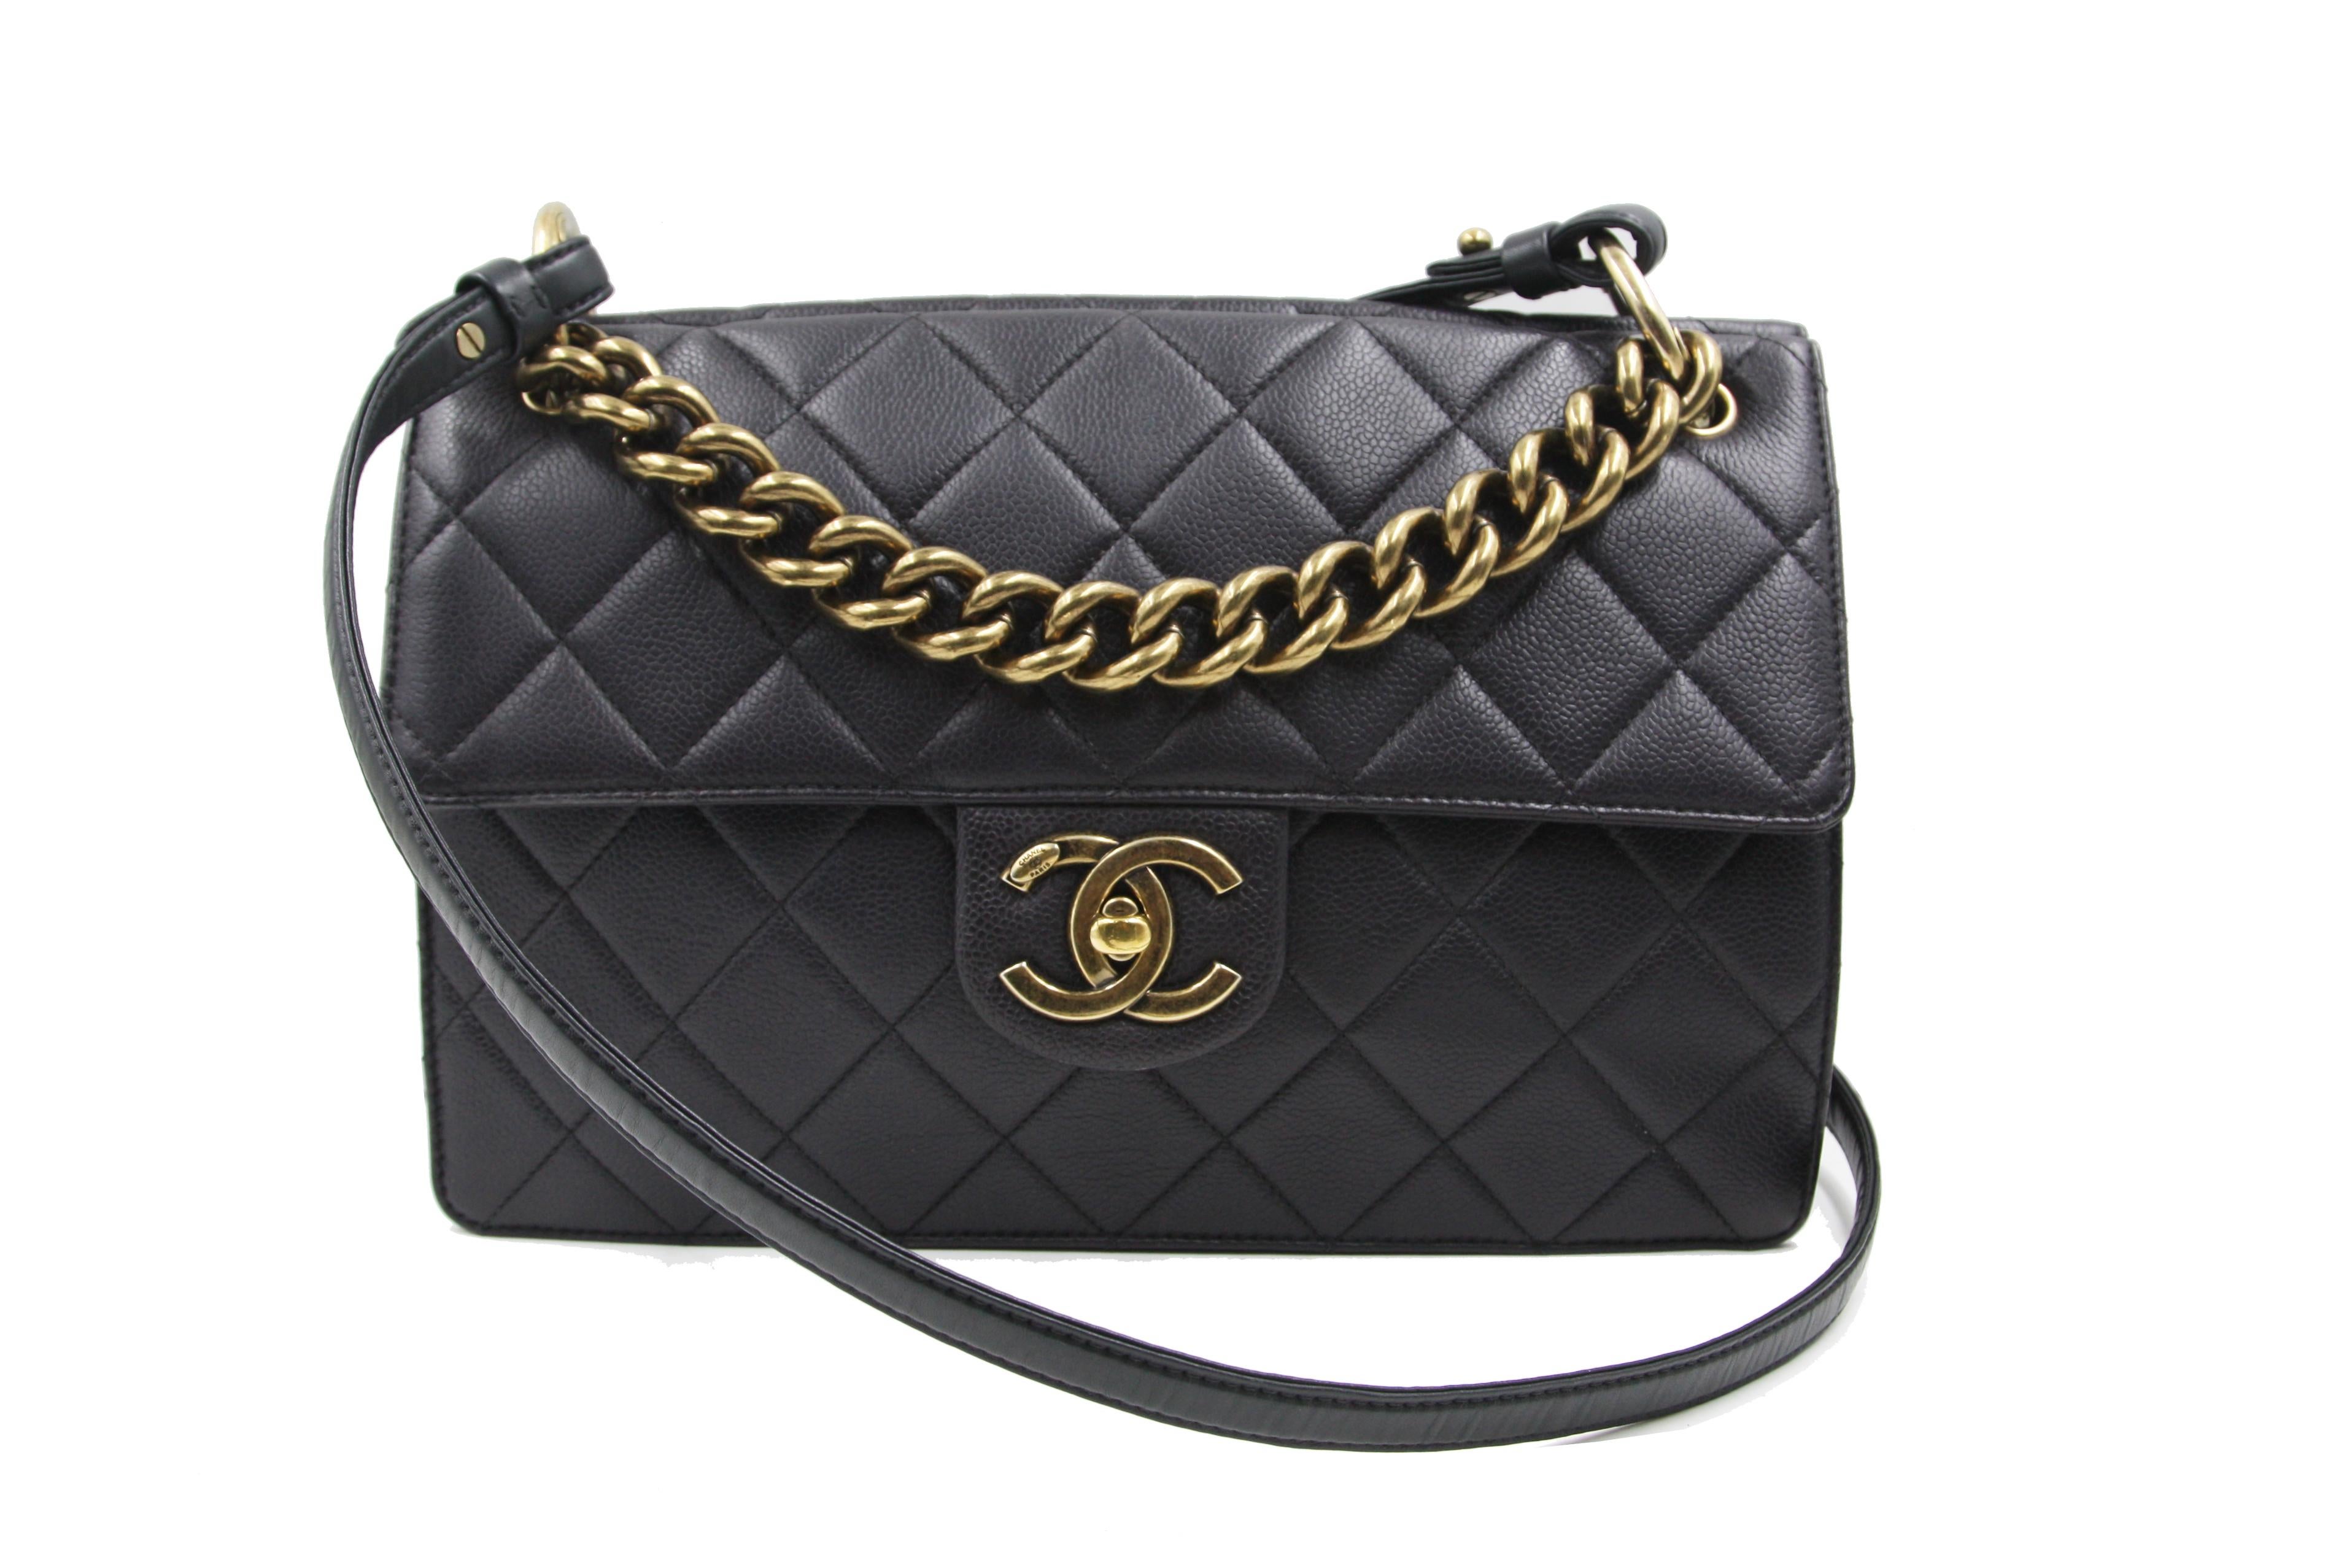 The Classic Handbag is an icon that has turned heads for more than half a century, earning a legendary reputation in the history of fashion.

A small, functional and perfectly proportioned masterpiece by Mademoiselle Chanel, the classic handbag